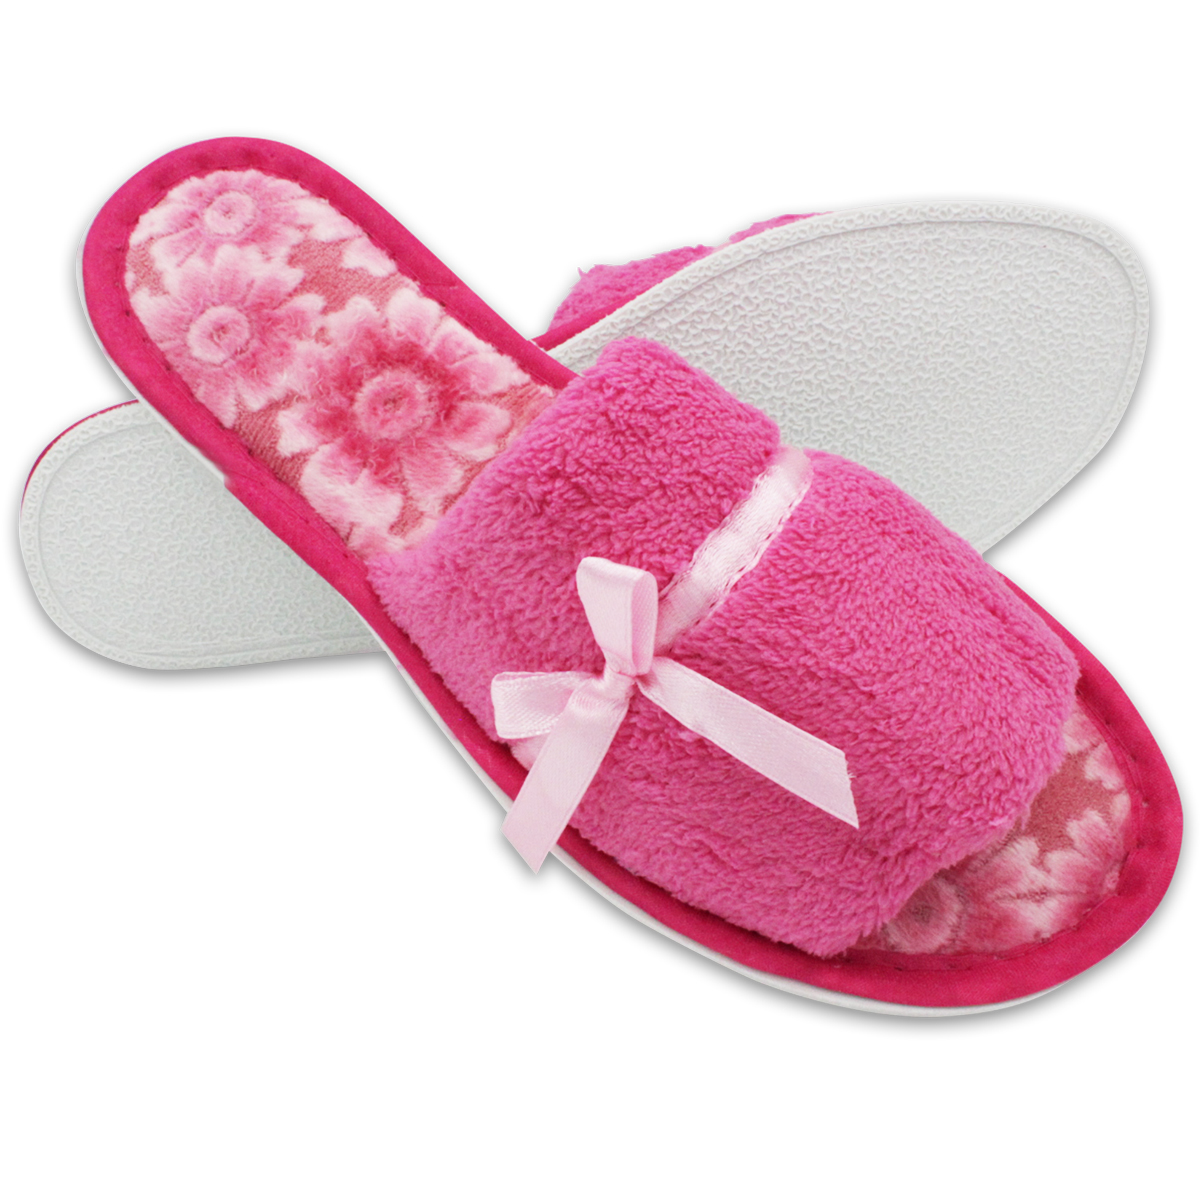 Women's Plush Open Toe Slippers Soft Comfy Terry Cloth House Shoes | eBay